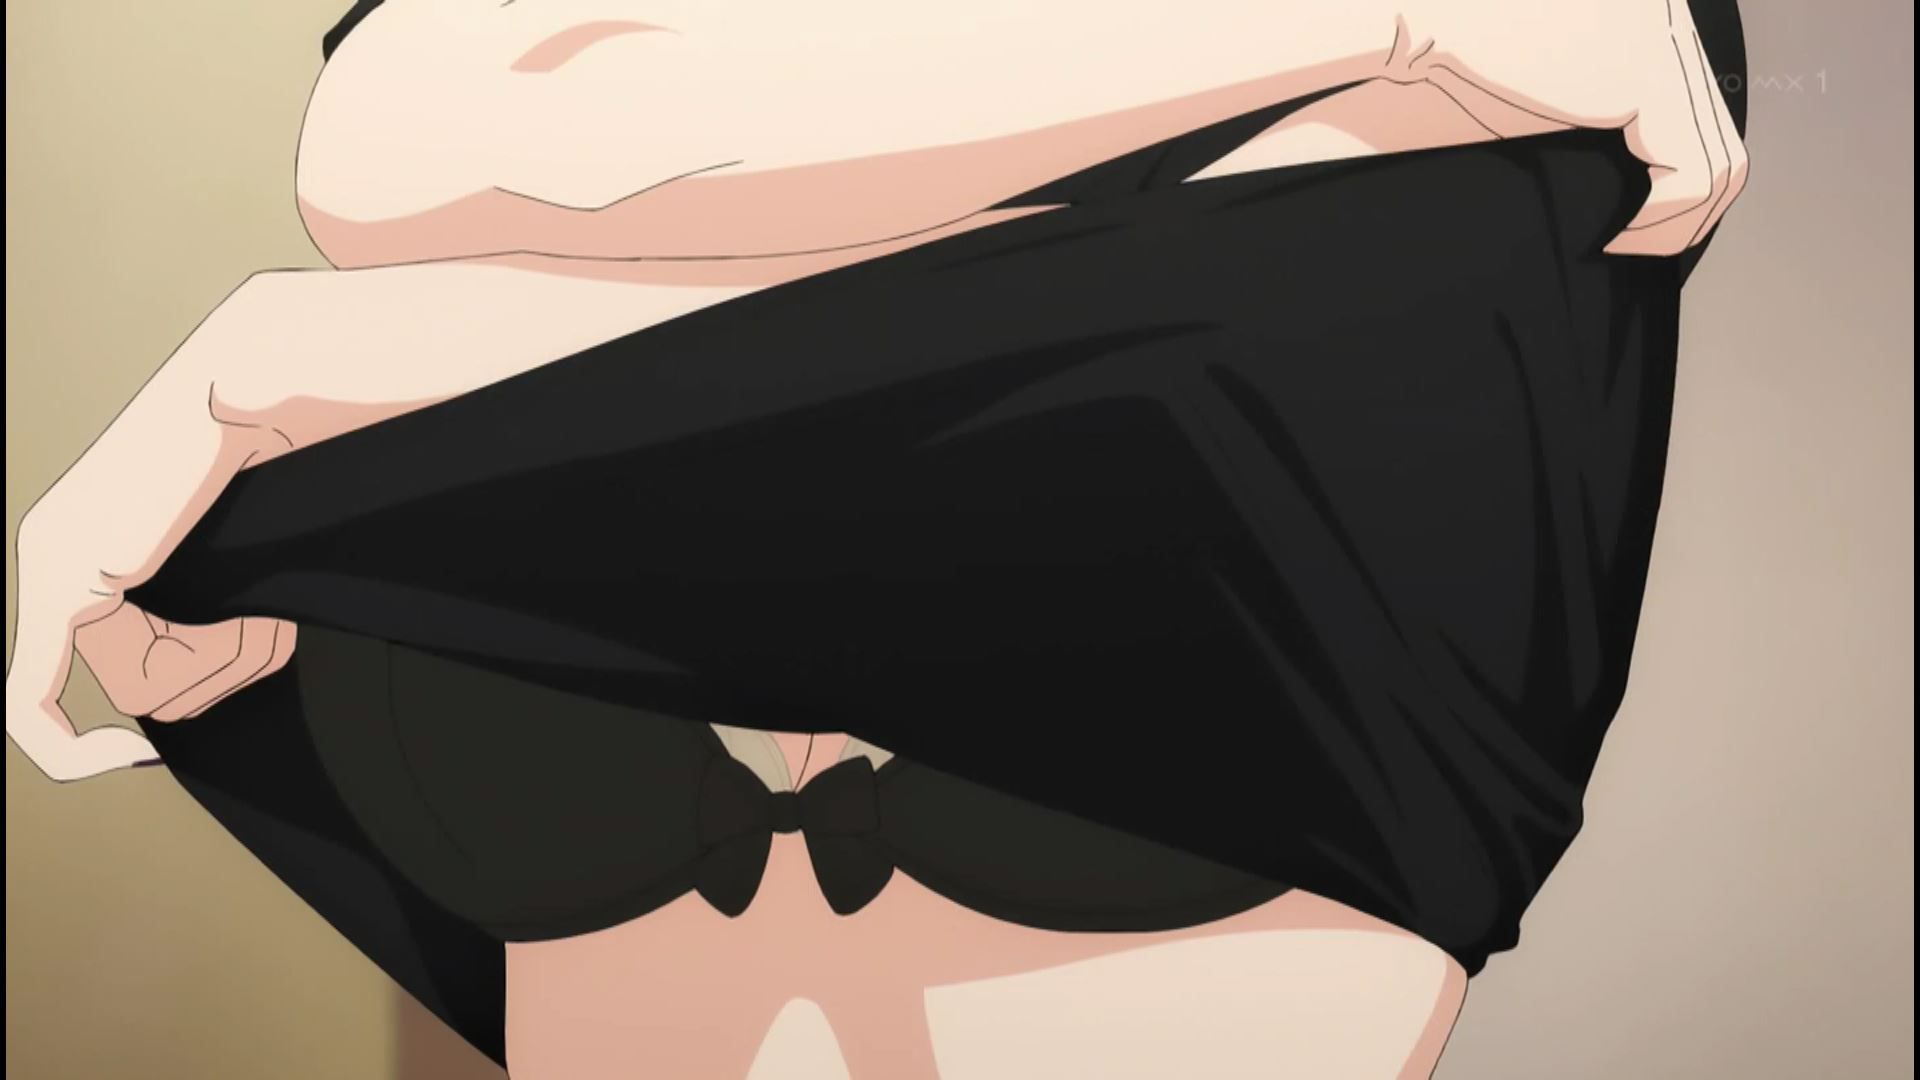 In the changing scene of episode 4 of the anime "That Dress-up Doll Falls in Love", pants and bra are fully visible! 3